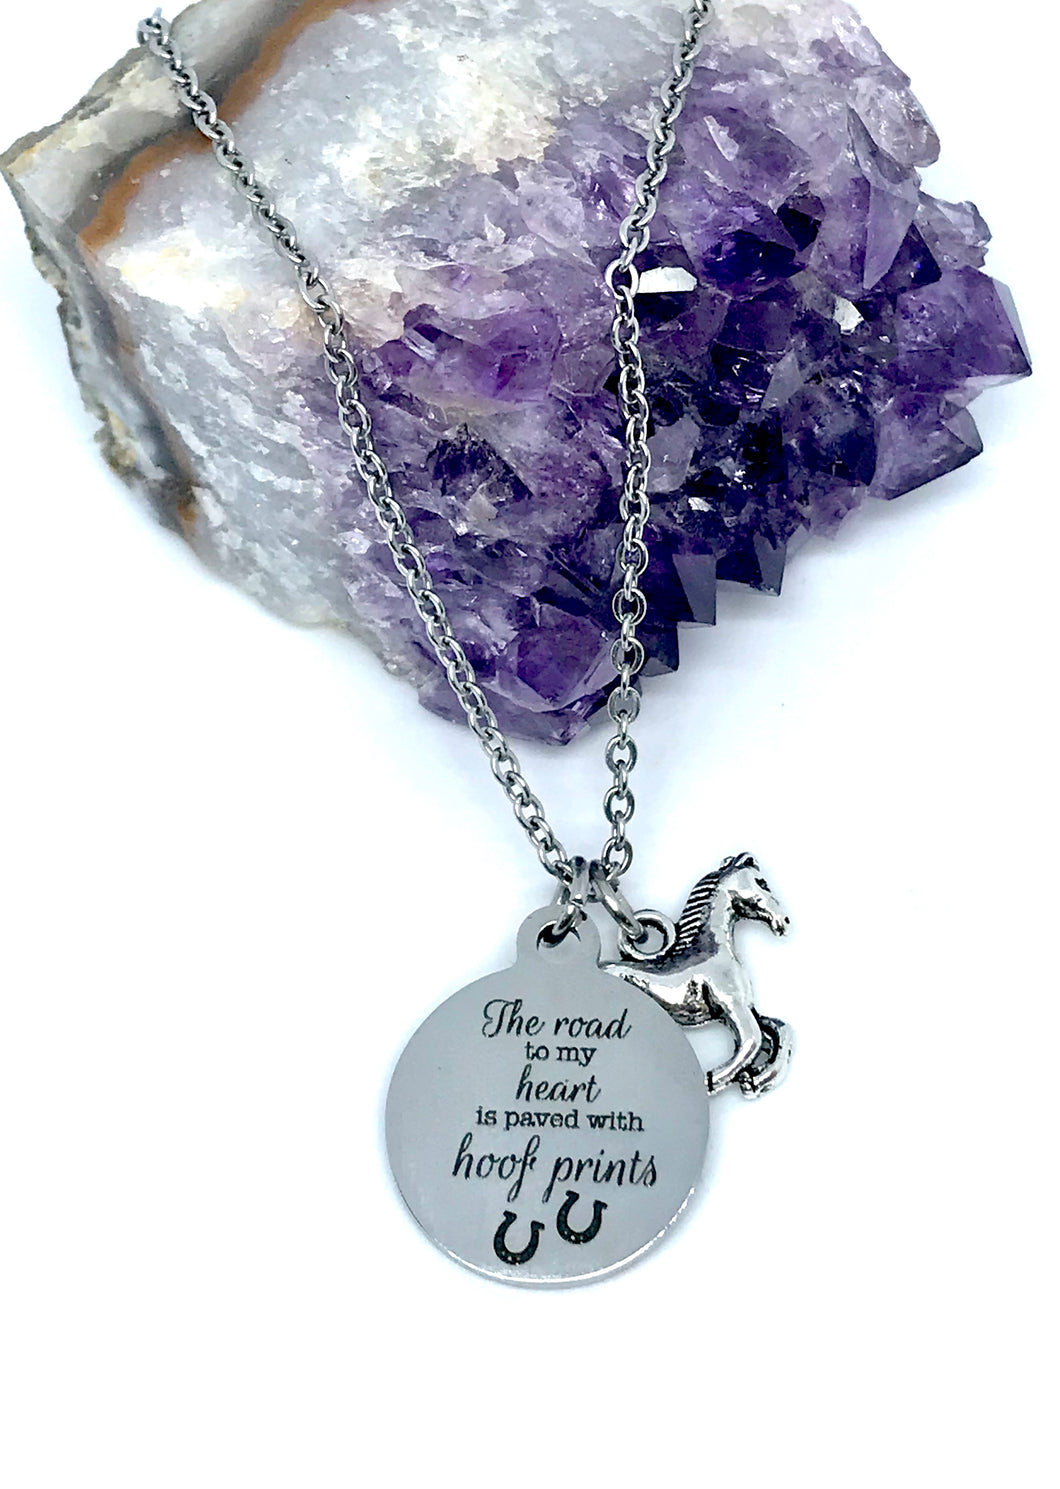 “The road to my heart is paved with hoof prints ” 3-in-1 Charm Necklace (Stainless Steel)